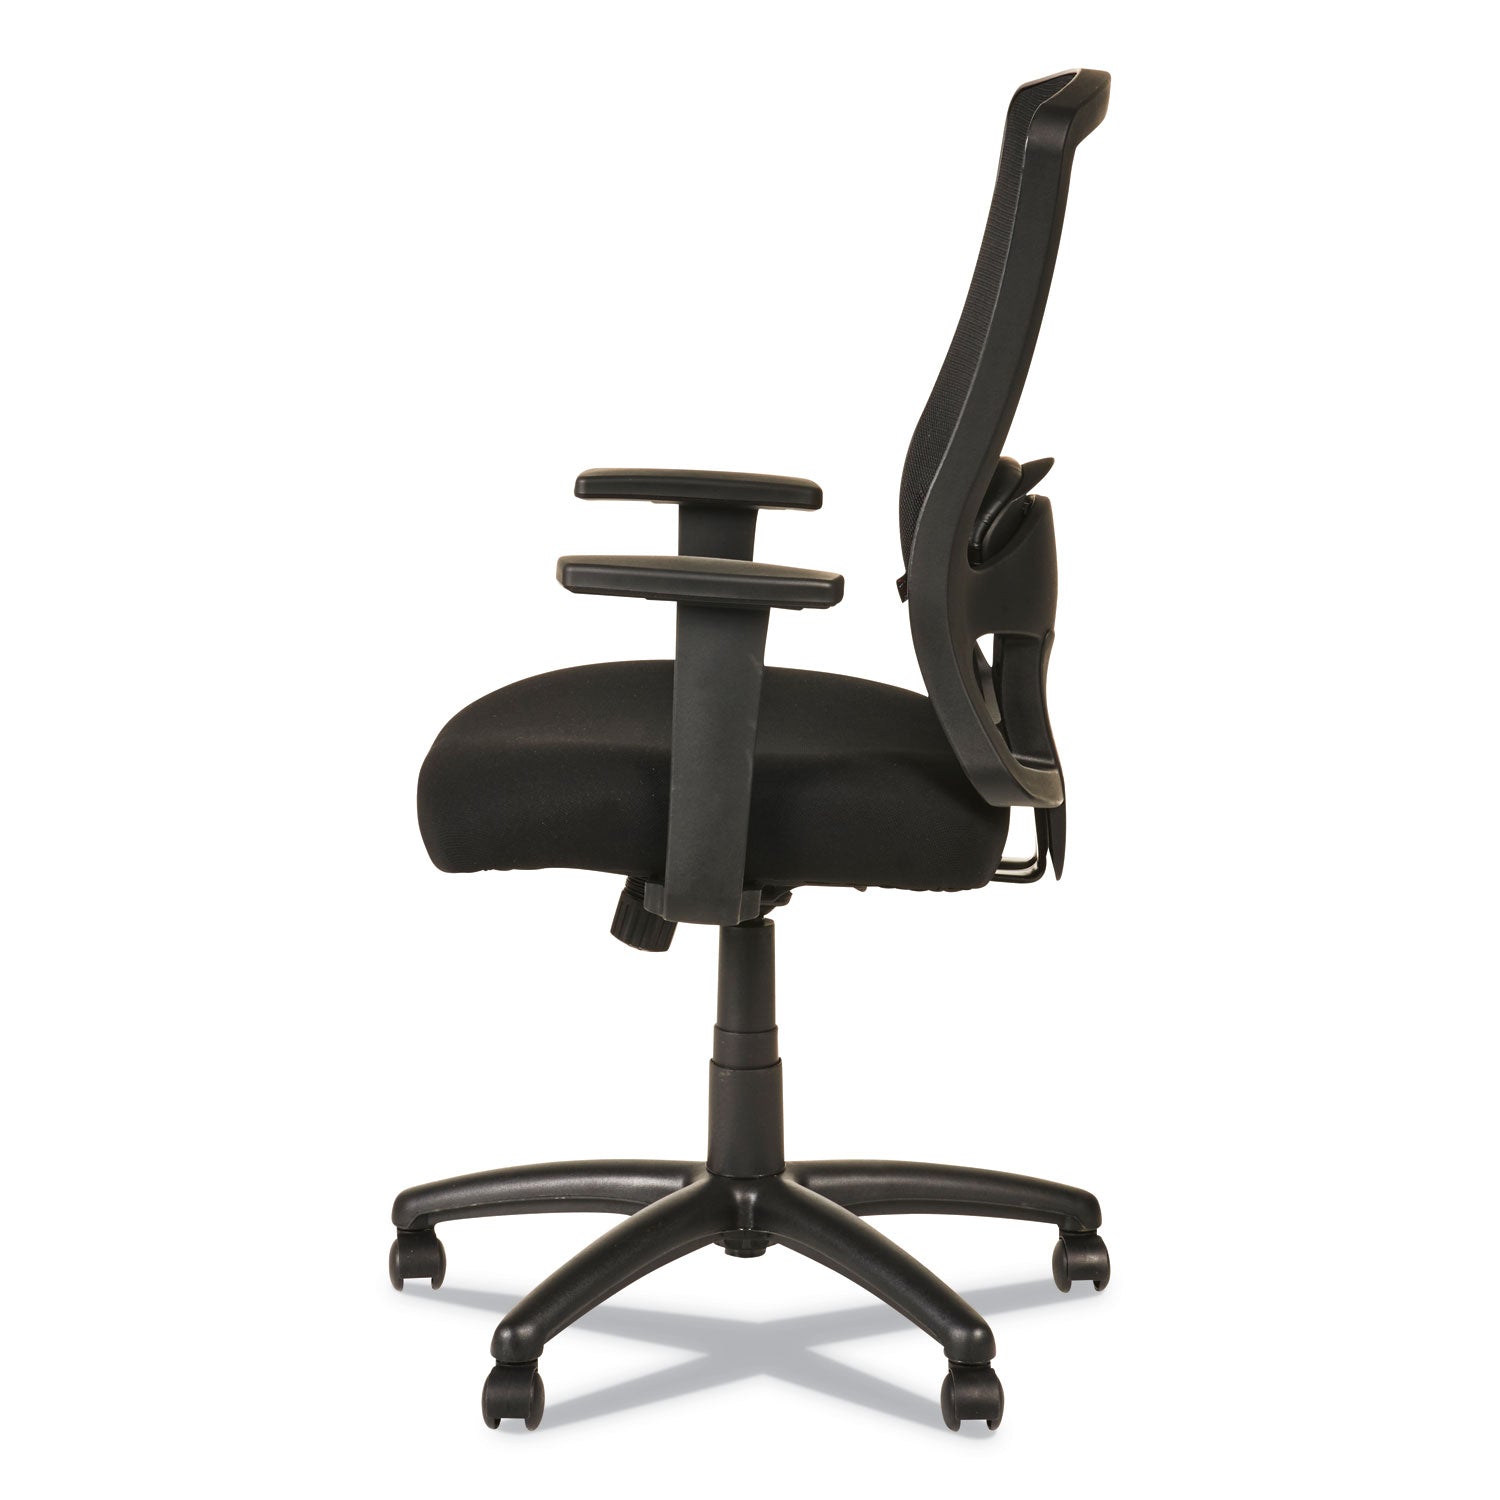 alera-etros-series-high-back-swivel-tilt-chair-supports-up-to-275-lb-1811-to-2204-seat-height-black_aleet4117b - 5